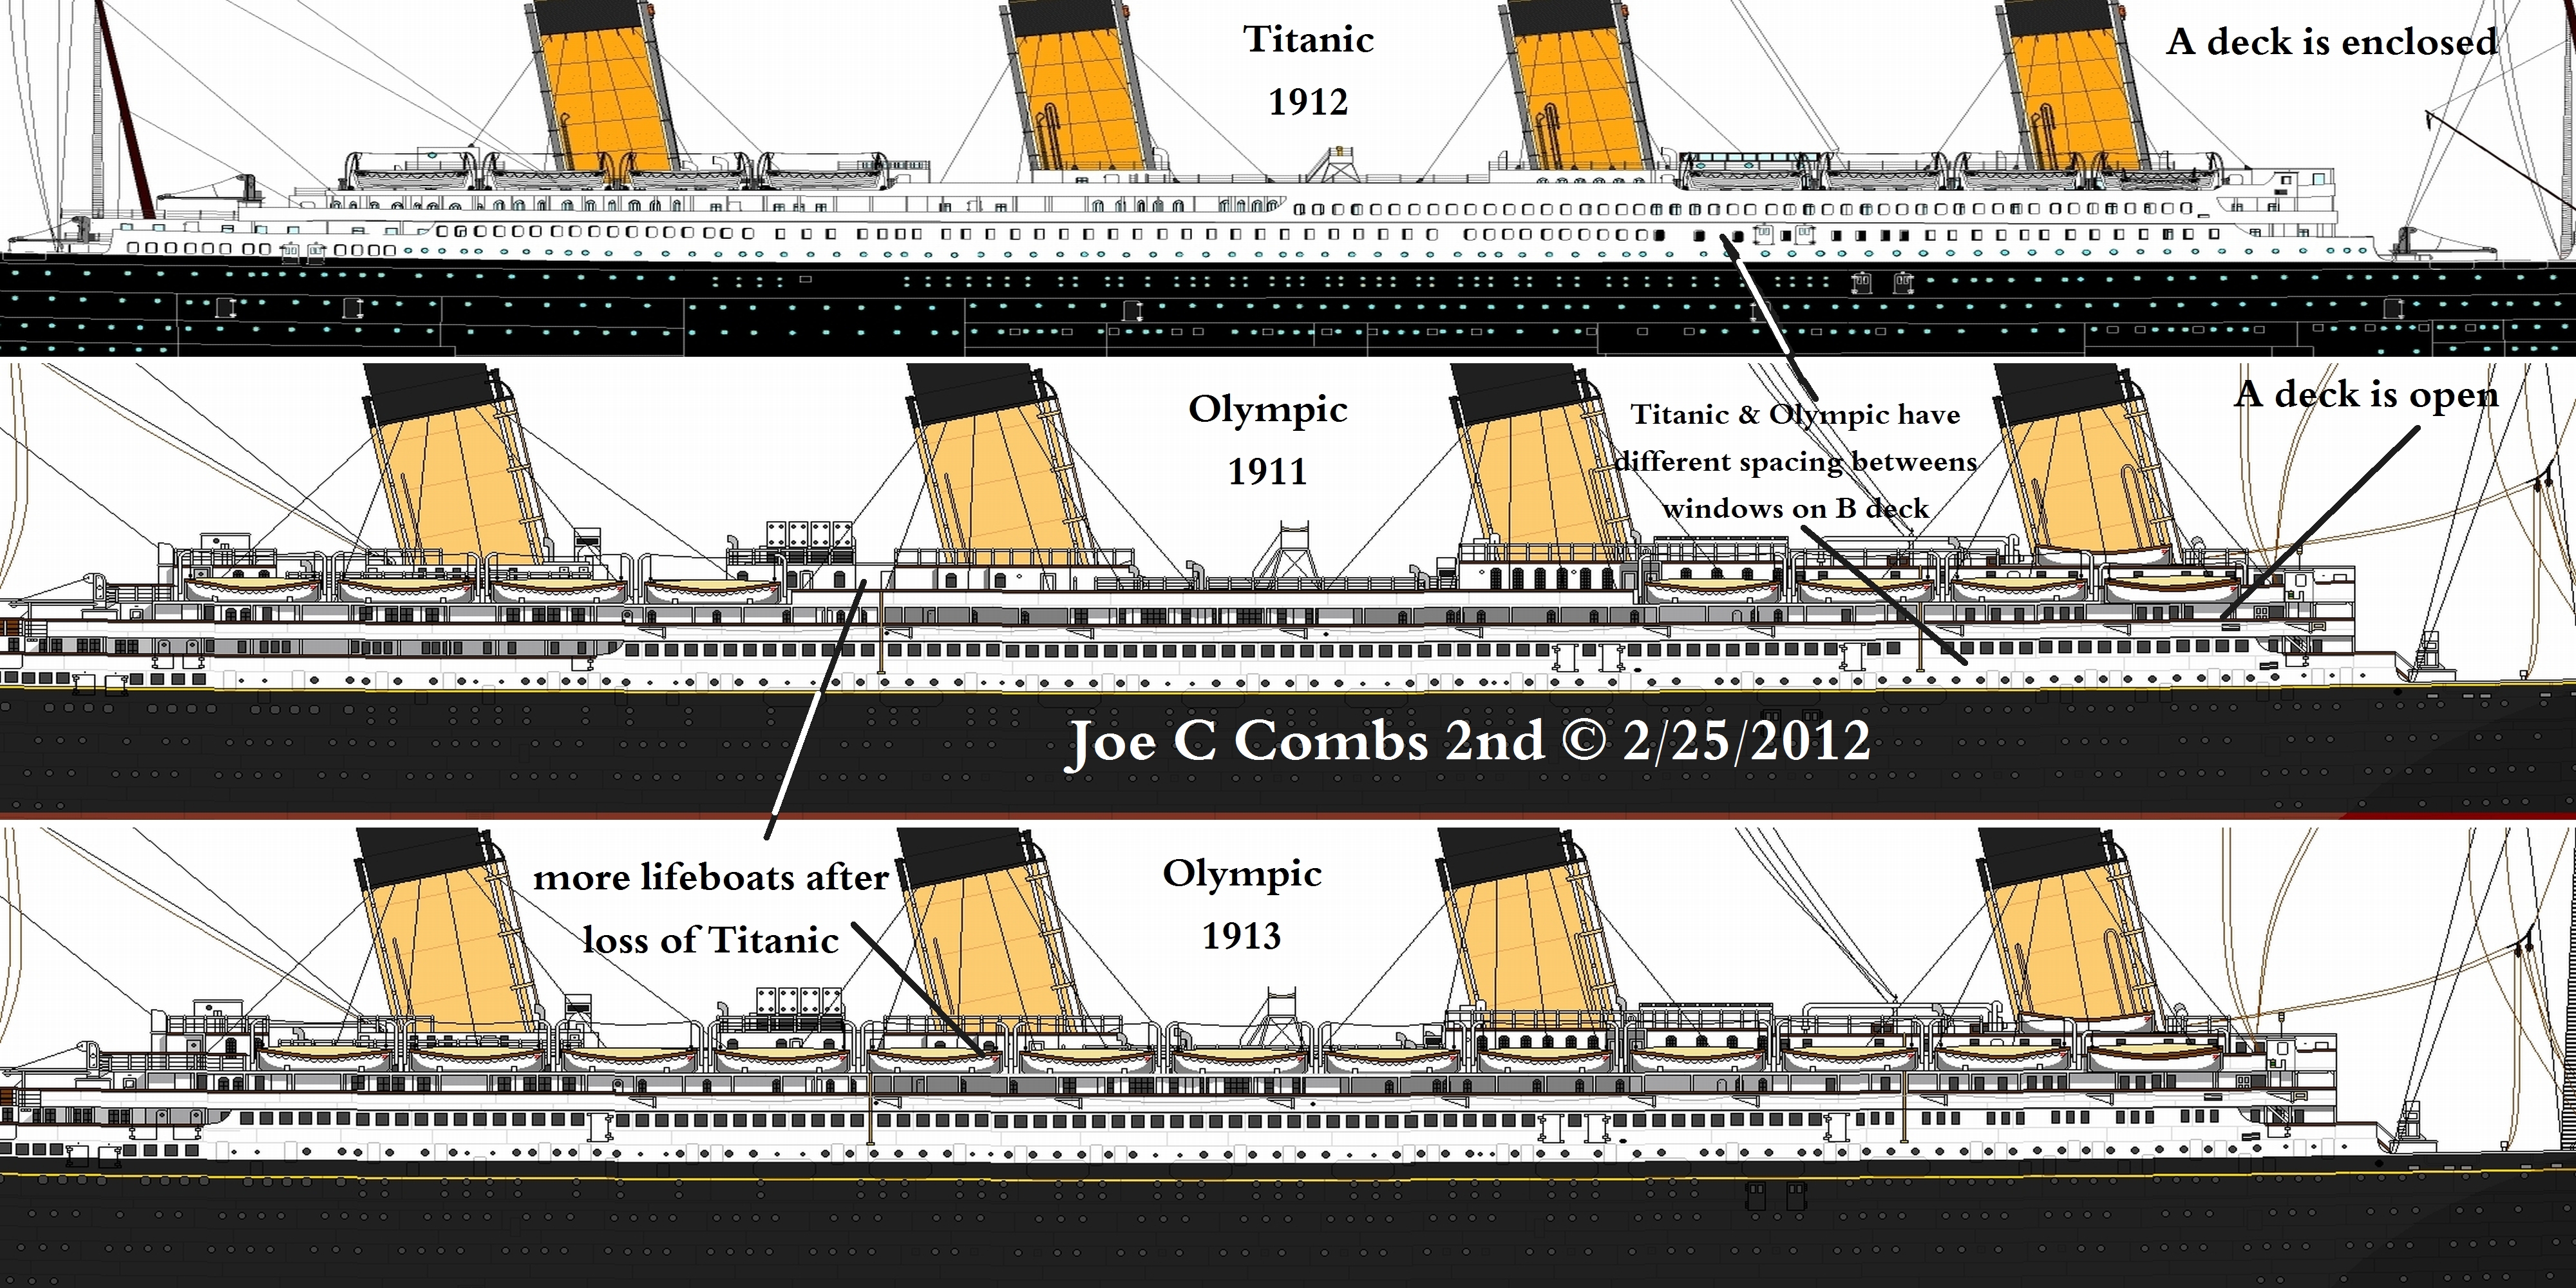 Where can you find information about the ship RMS Titanic?